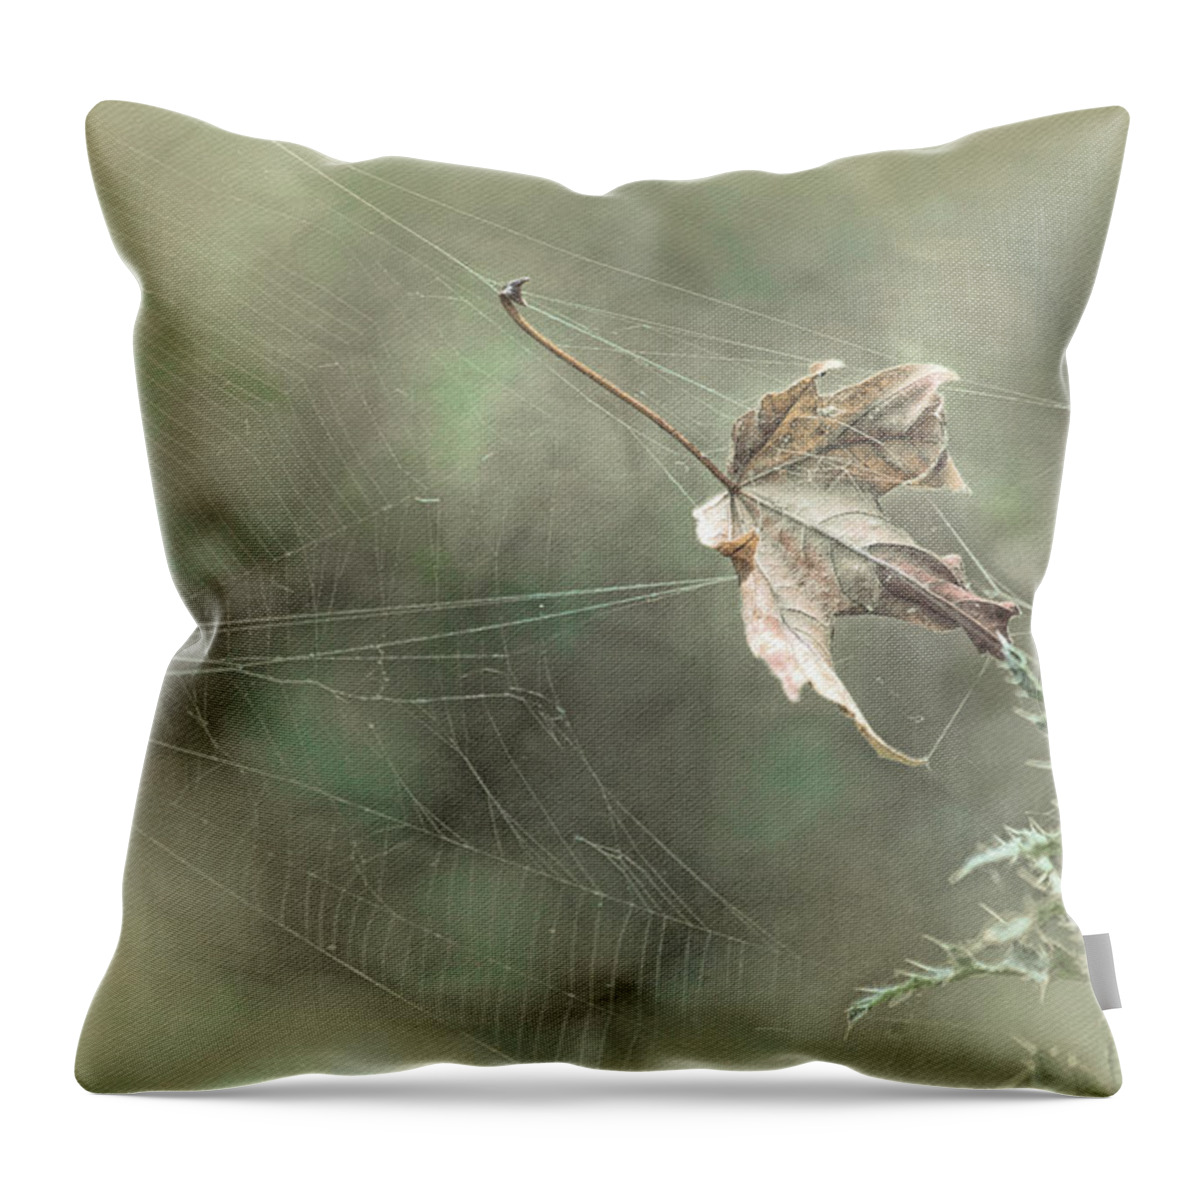 Spiderweb Throw Pillow featuring the photograph Leaf in Spiderweb by Bonnie Bruno